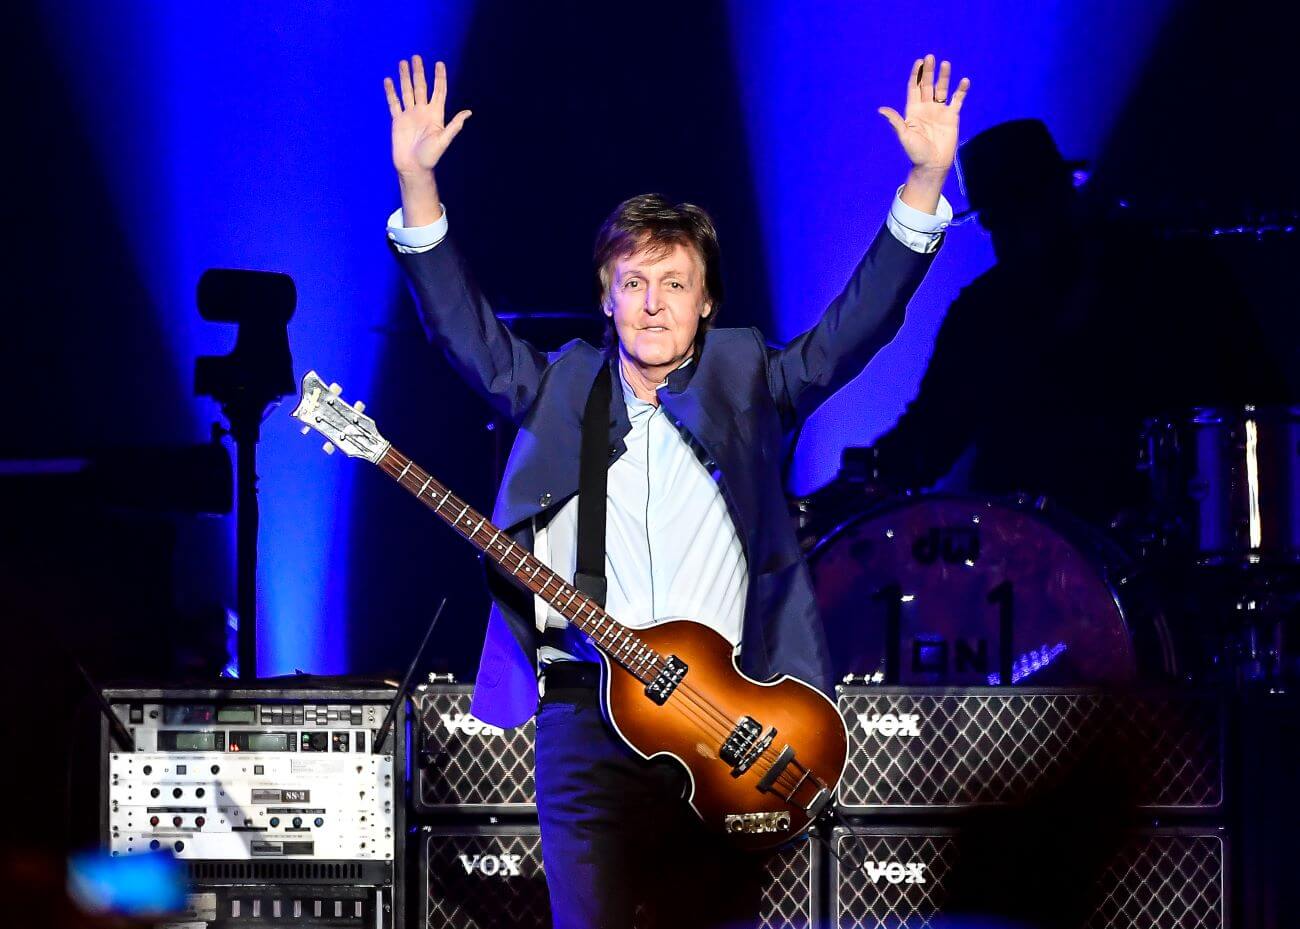 Paul McCartney has a guitar on a strap around his neck and holds his arms in the air.